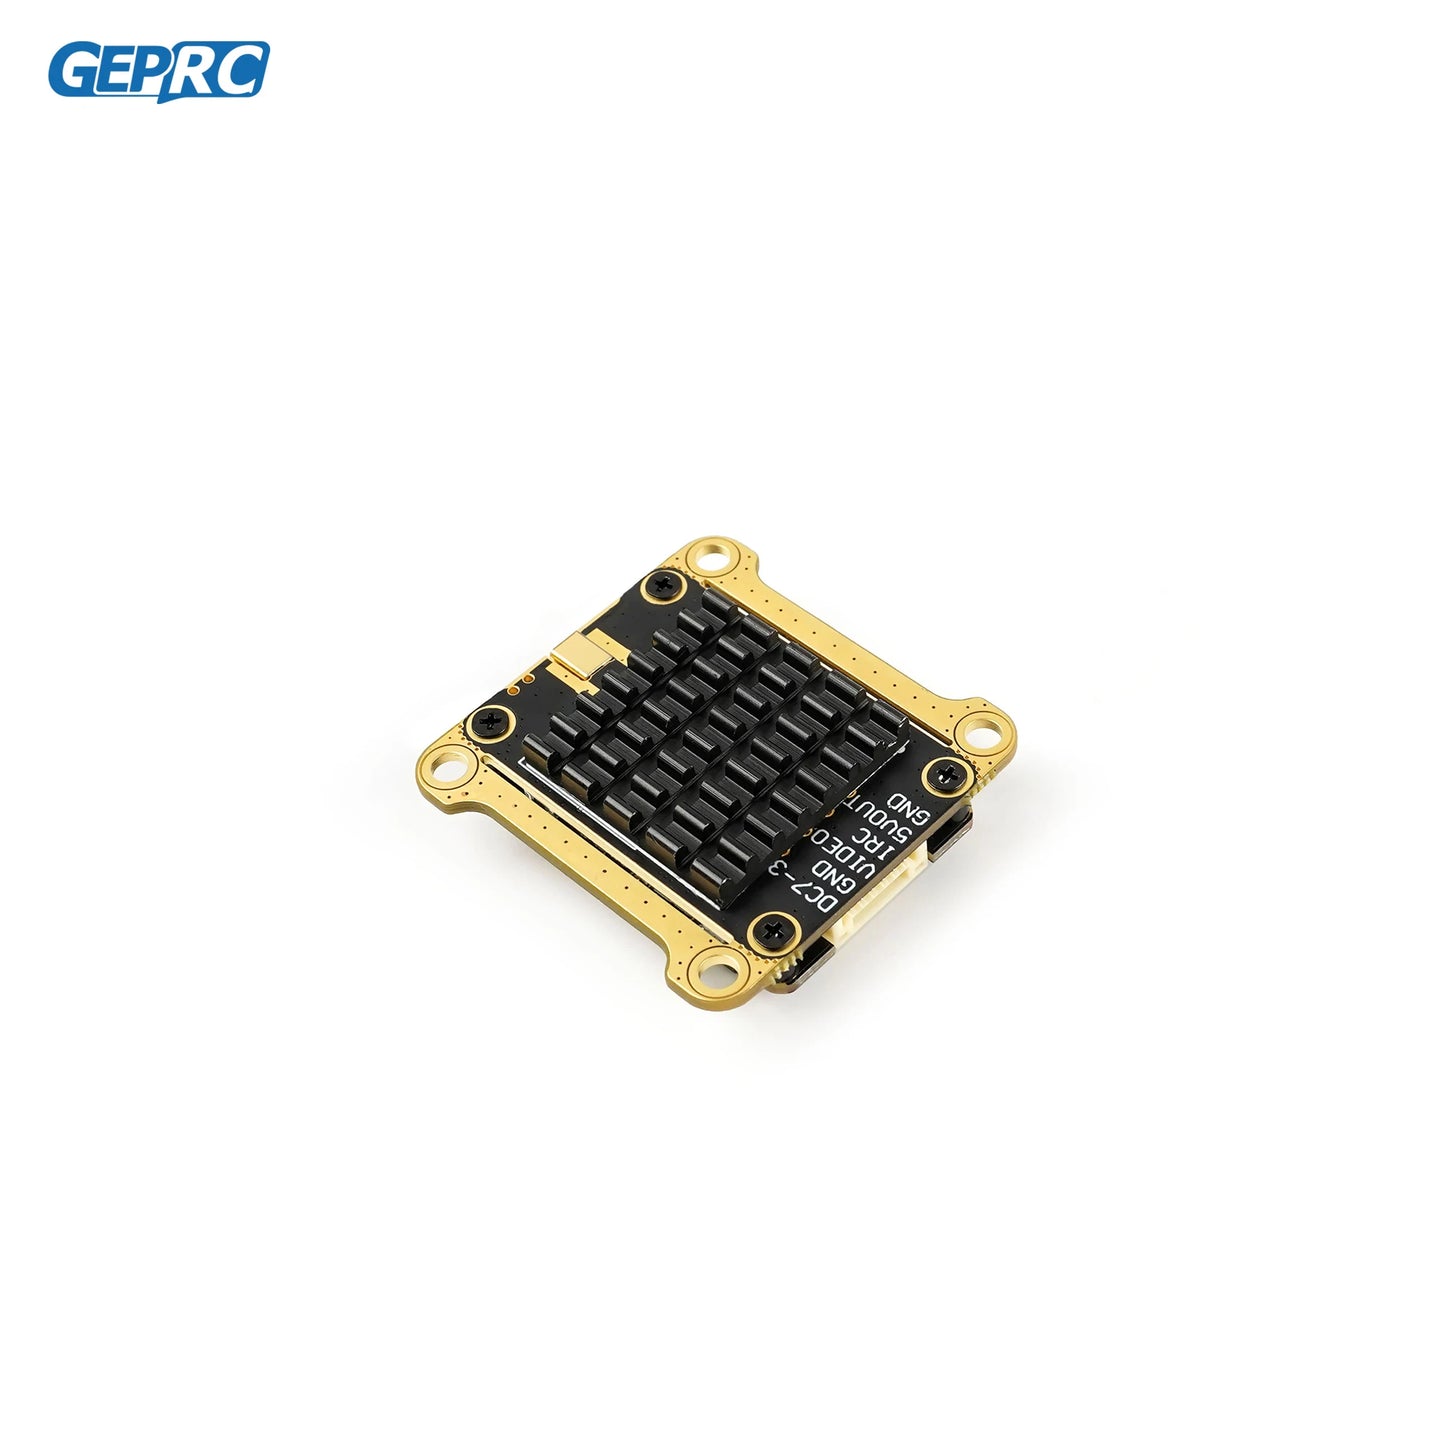 GEPRC RAD VTX - 5.8G 2.5W PitMode 2500mW Output Long Range Transmitter Tramp Support Microphone RC FPV Racing Drone